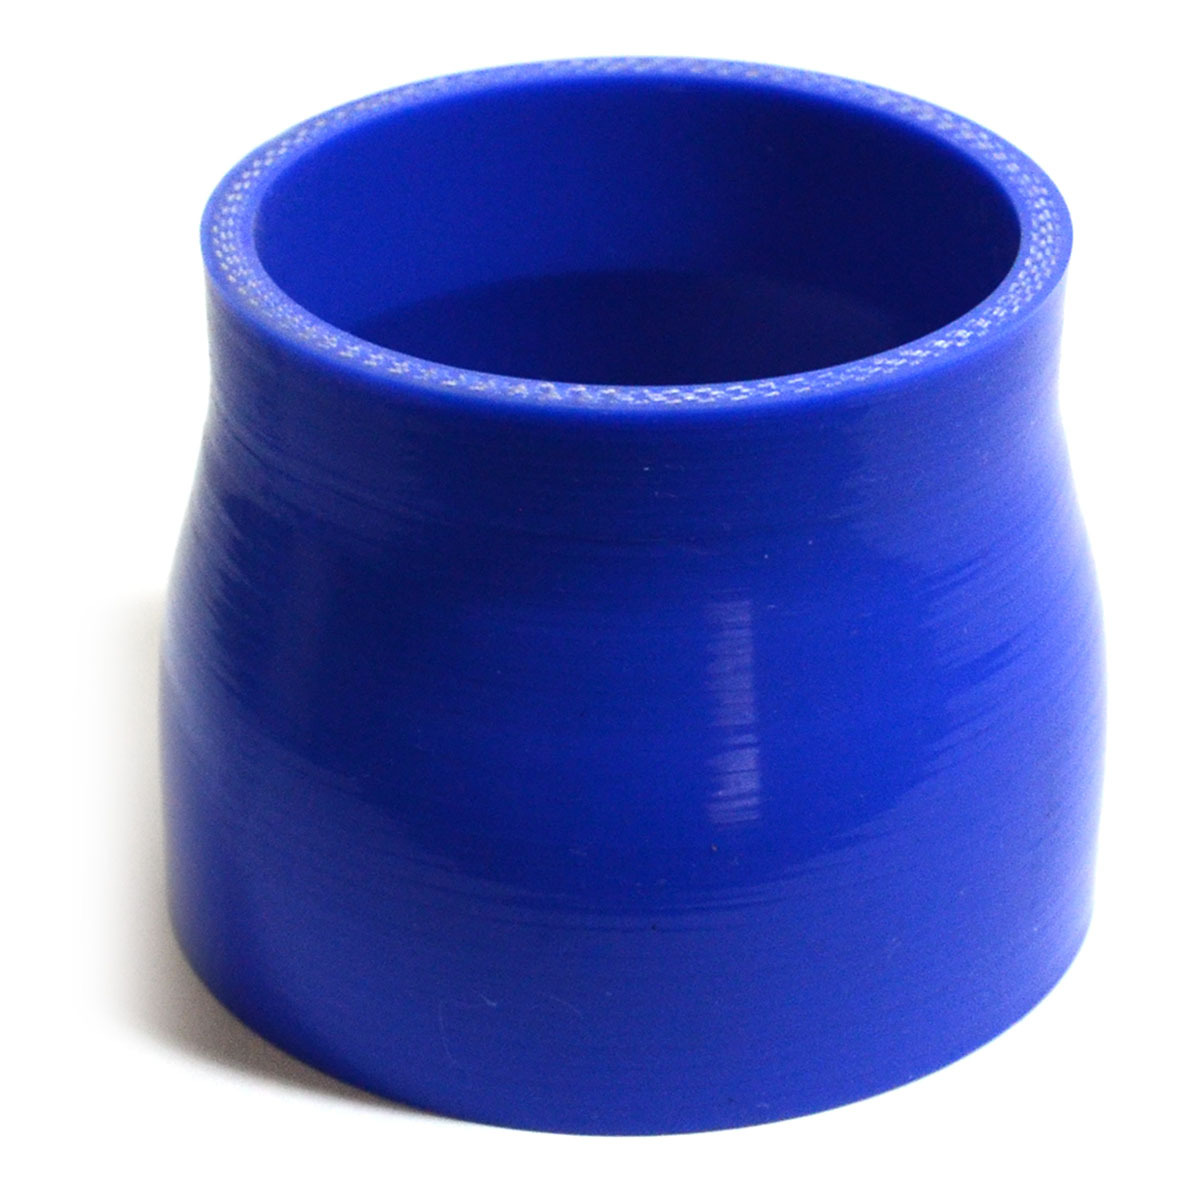 Straight 4 Ply Silicone Reducer 76mm x 89mm x 76mm Blue